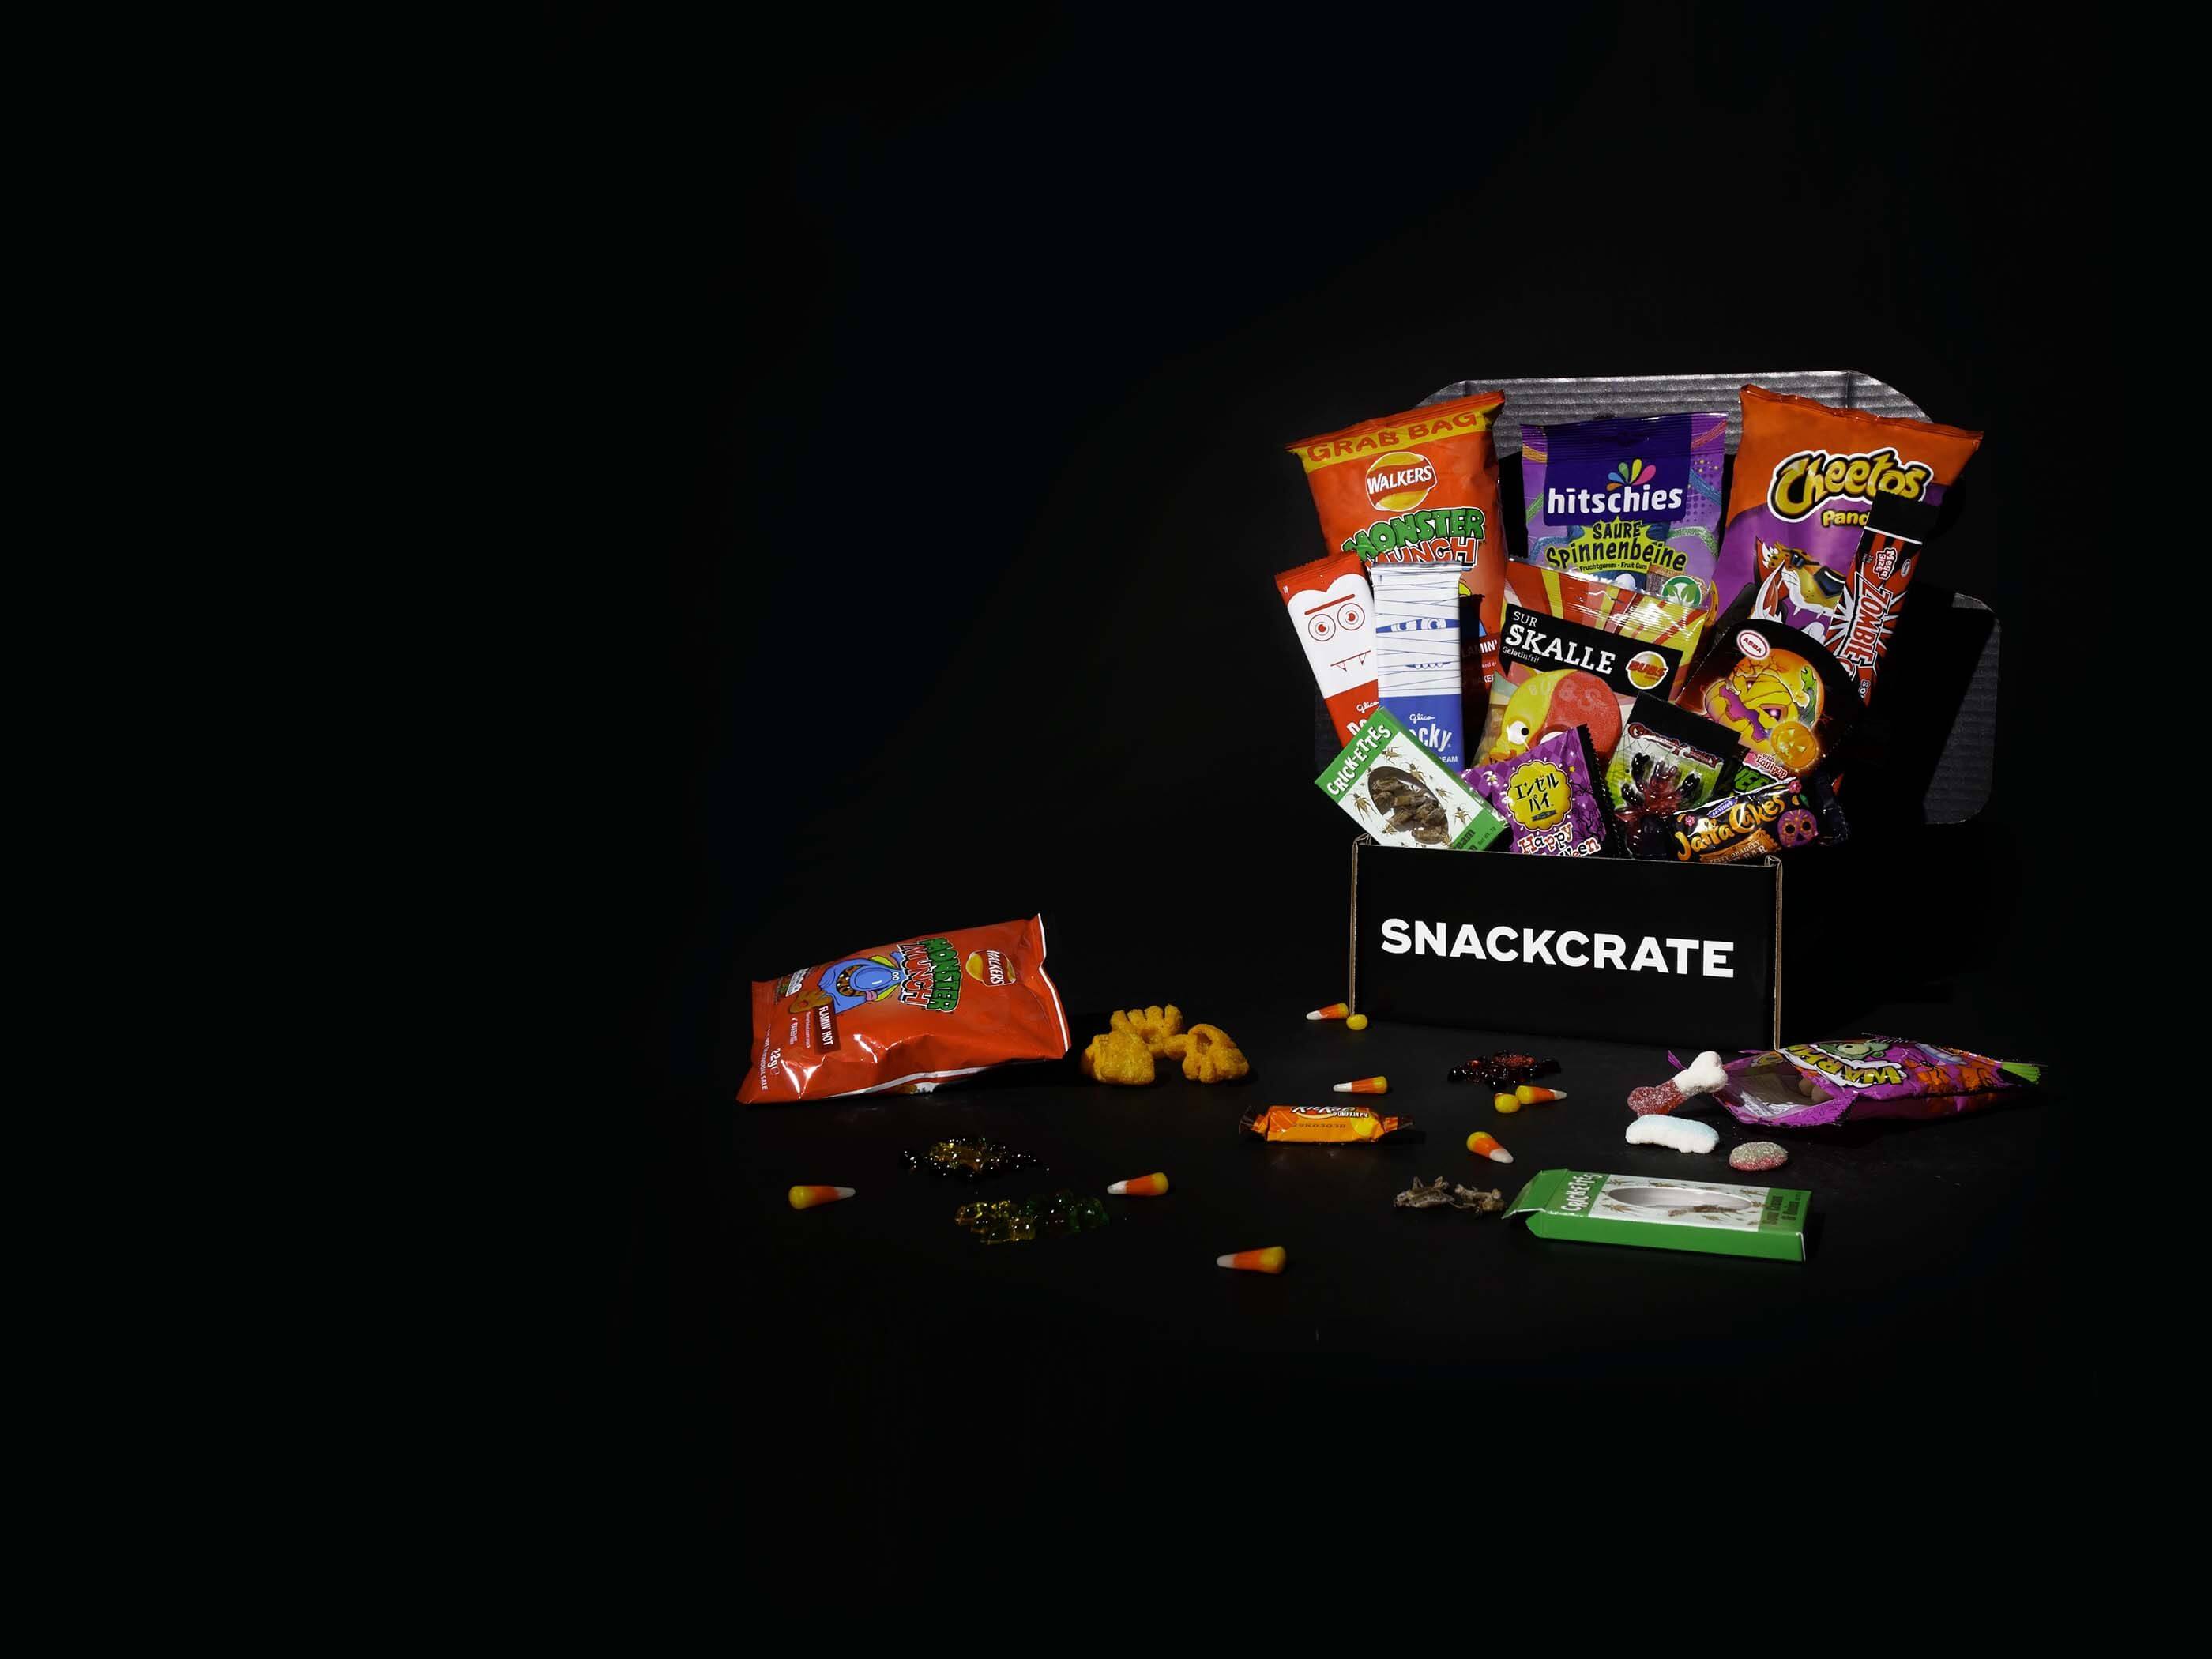 Halloween snackcrate full of foreign snacks